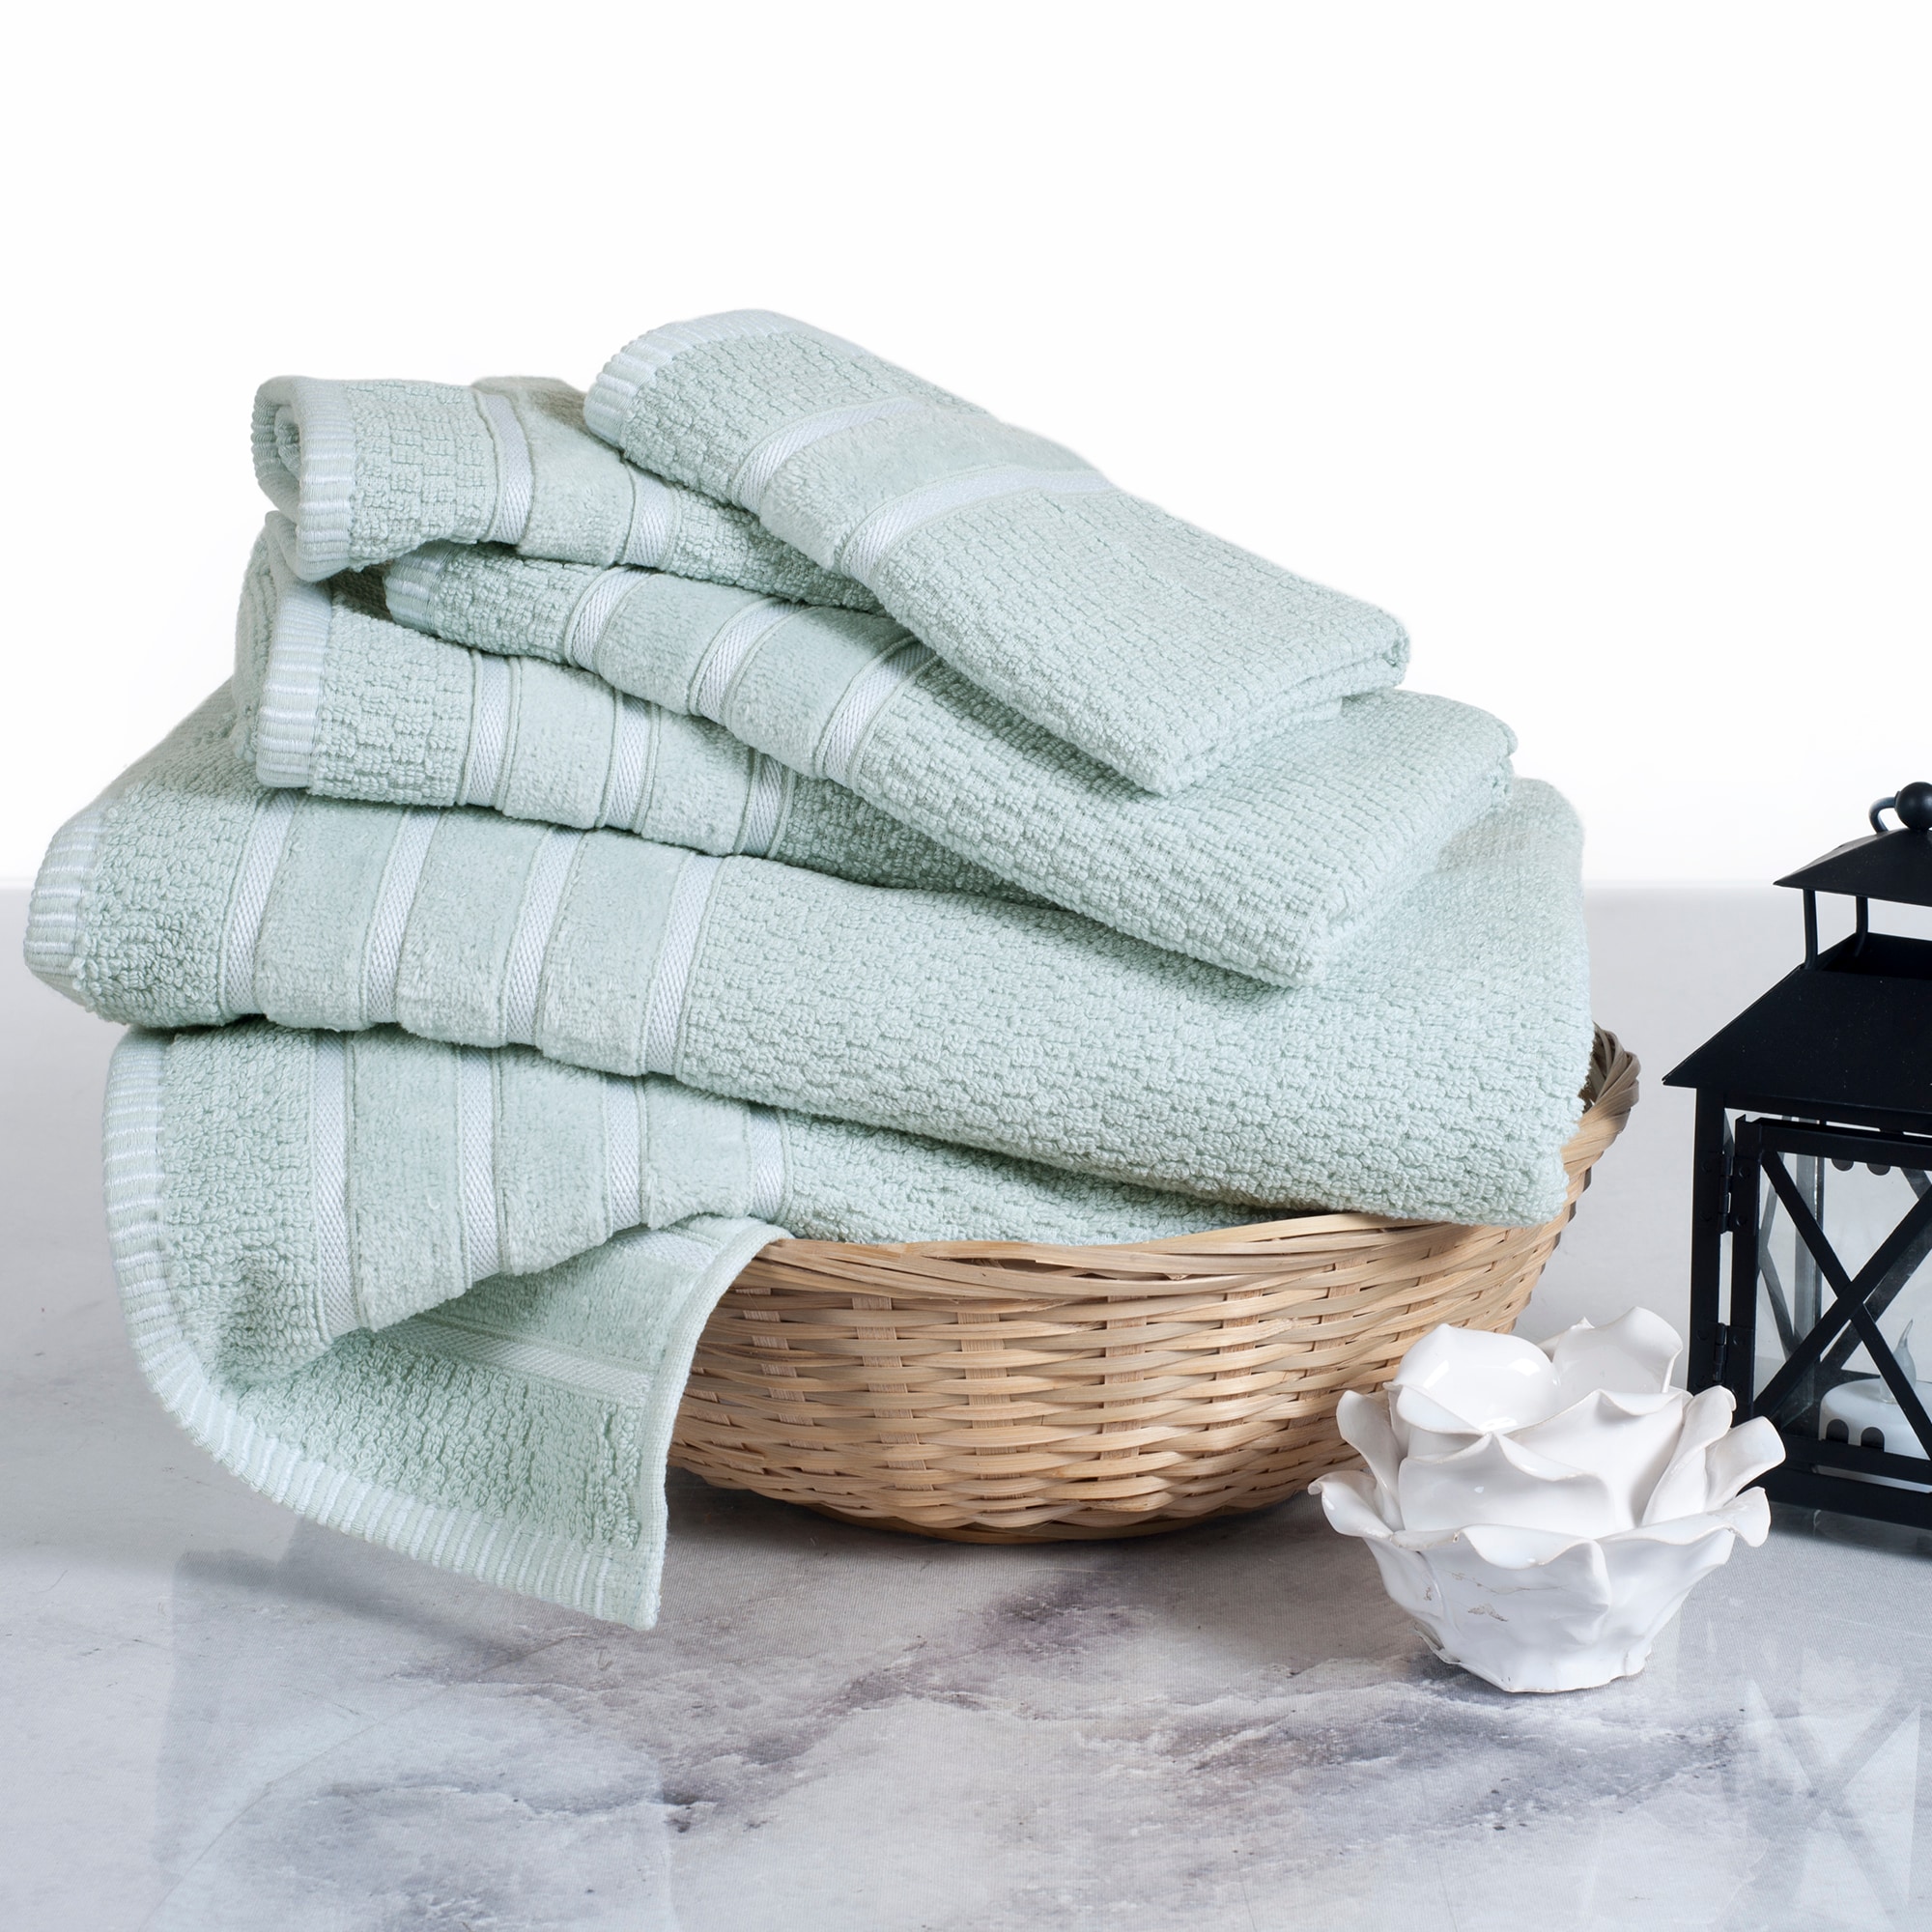 Hastings Home 2-Piece White/Black Cotton Quick Dry Bath Towel Set (Bath  Towels) in the Bathroom Towels department at